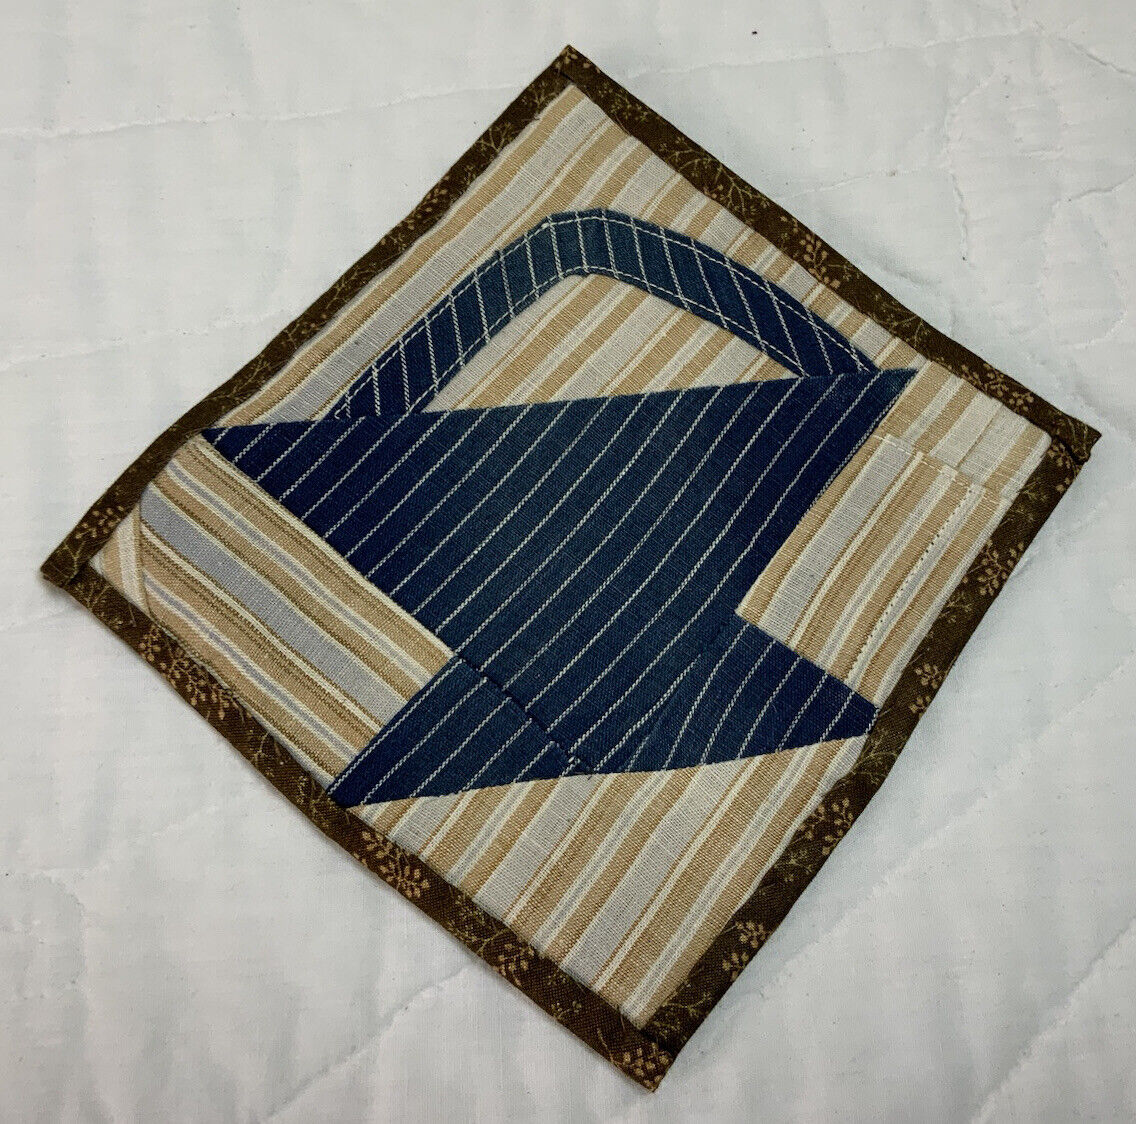 Vintage Antique Patchwork Quilt Wall Hanging, Small, Basket, Blue & White